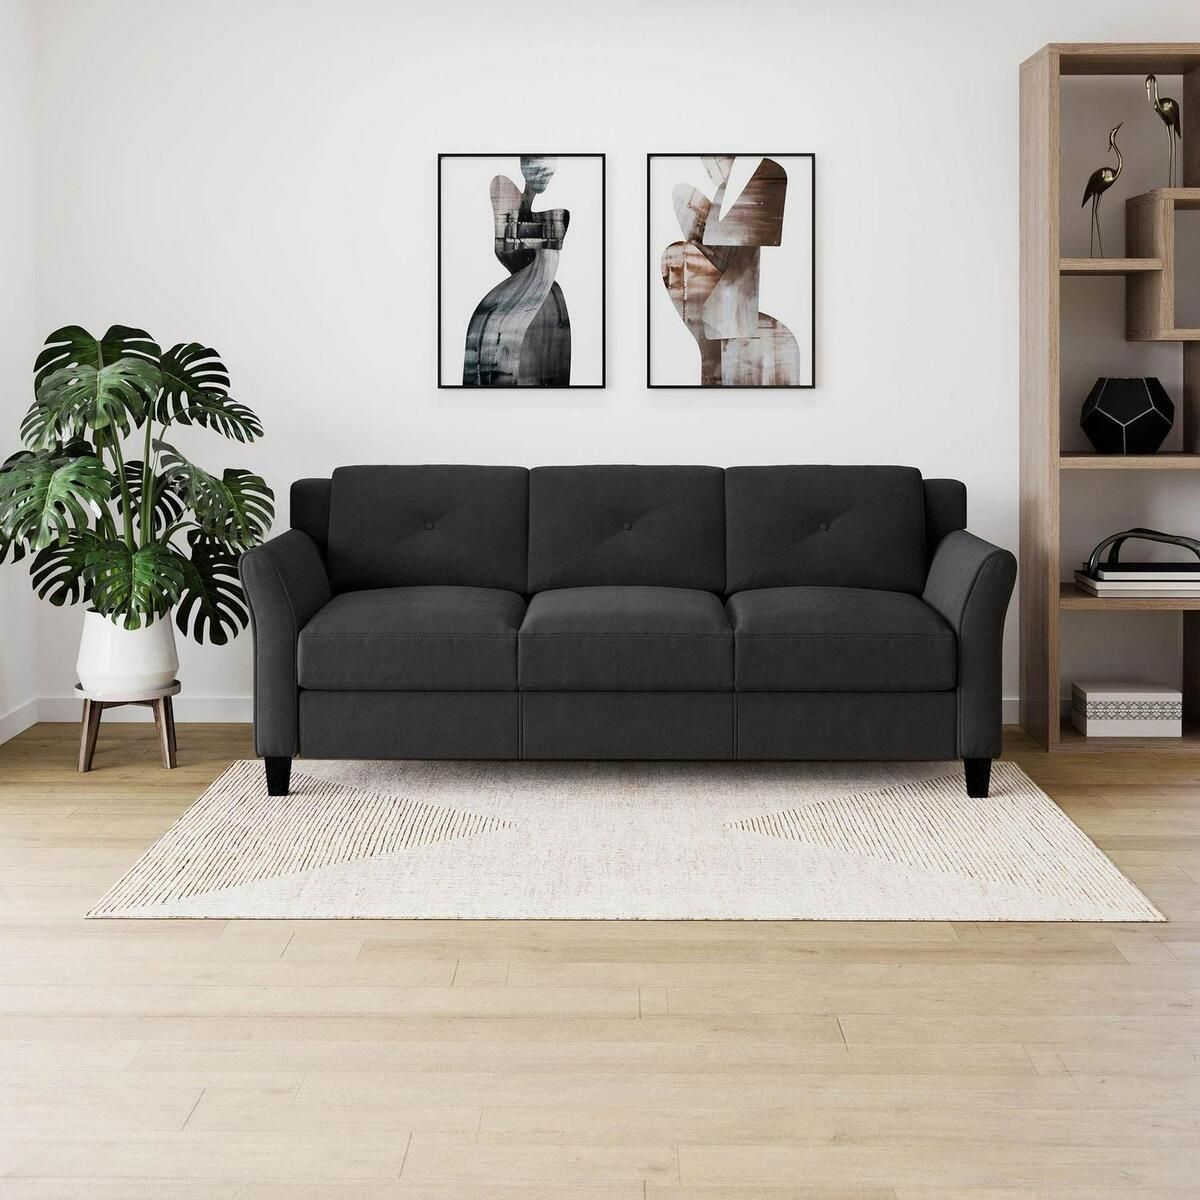 Traditional Sofa Curved Rolled Arms Comfortable Taryn Black Fabric | Ebay Within Traditional Black Fabric Sofas (View 5 of 15)